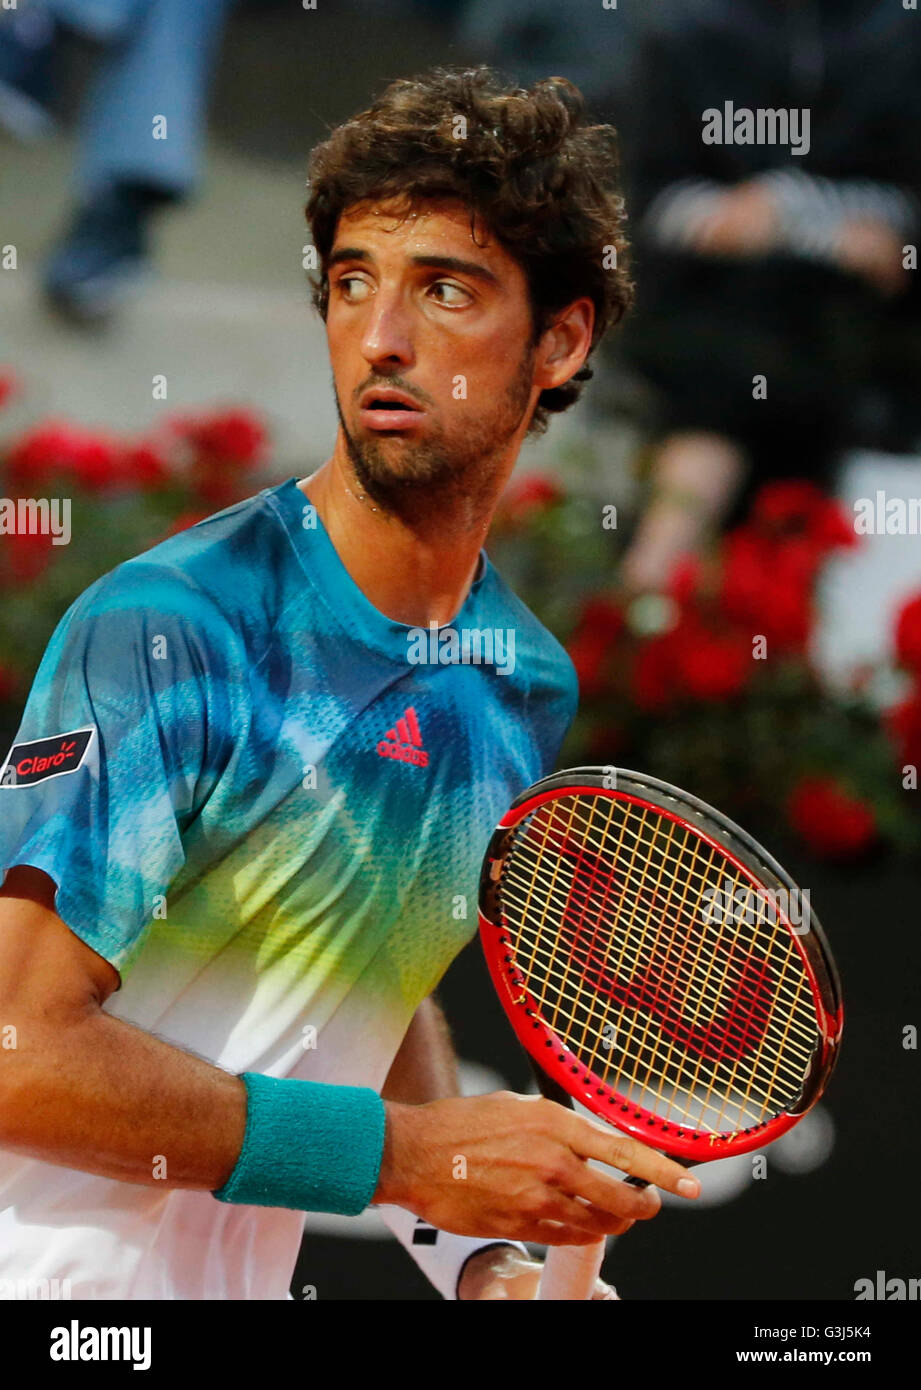 Rome, Italy. 12th May, 2016. Thomaz Bellucci of Brasil during 3rd round  match of the Italian Open tennis BNL2016 tournament against Novak Djokovic  of Serbia. Novak Djokovic has evened his third-round match